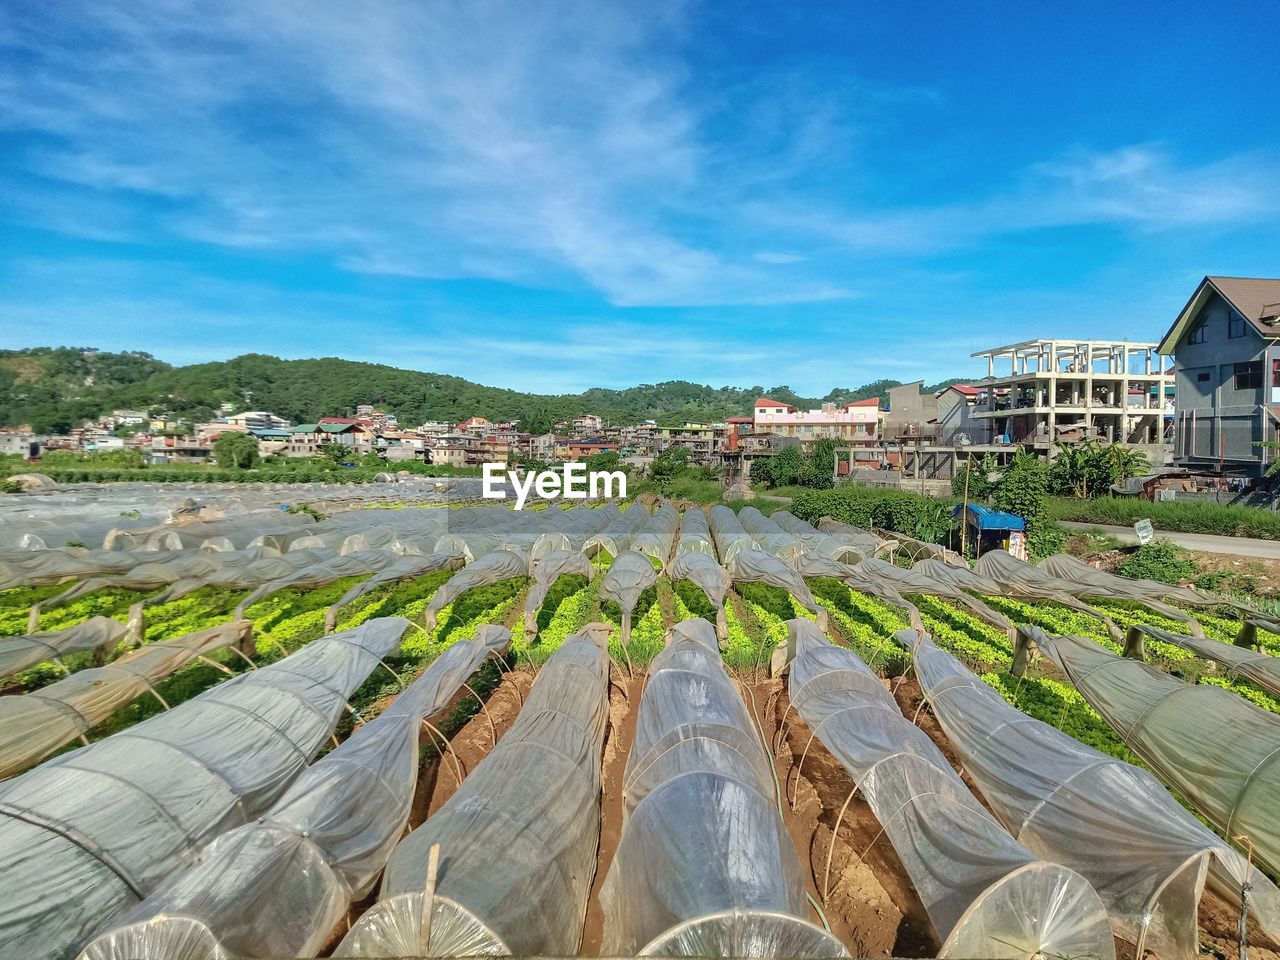 Panoramic urban city view of agricultural land buildings against blue sky